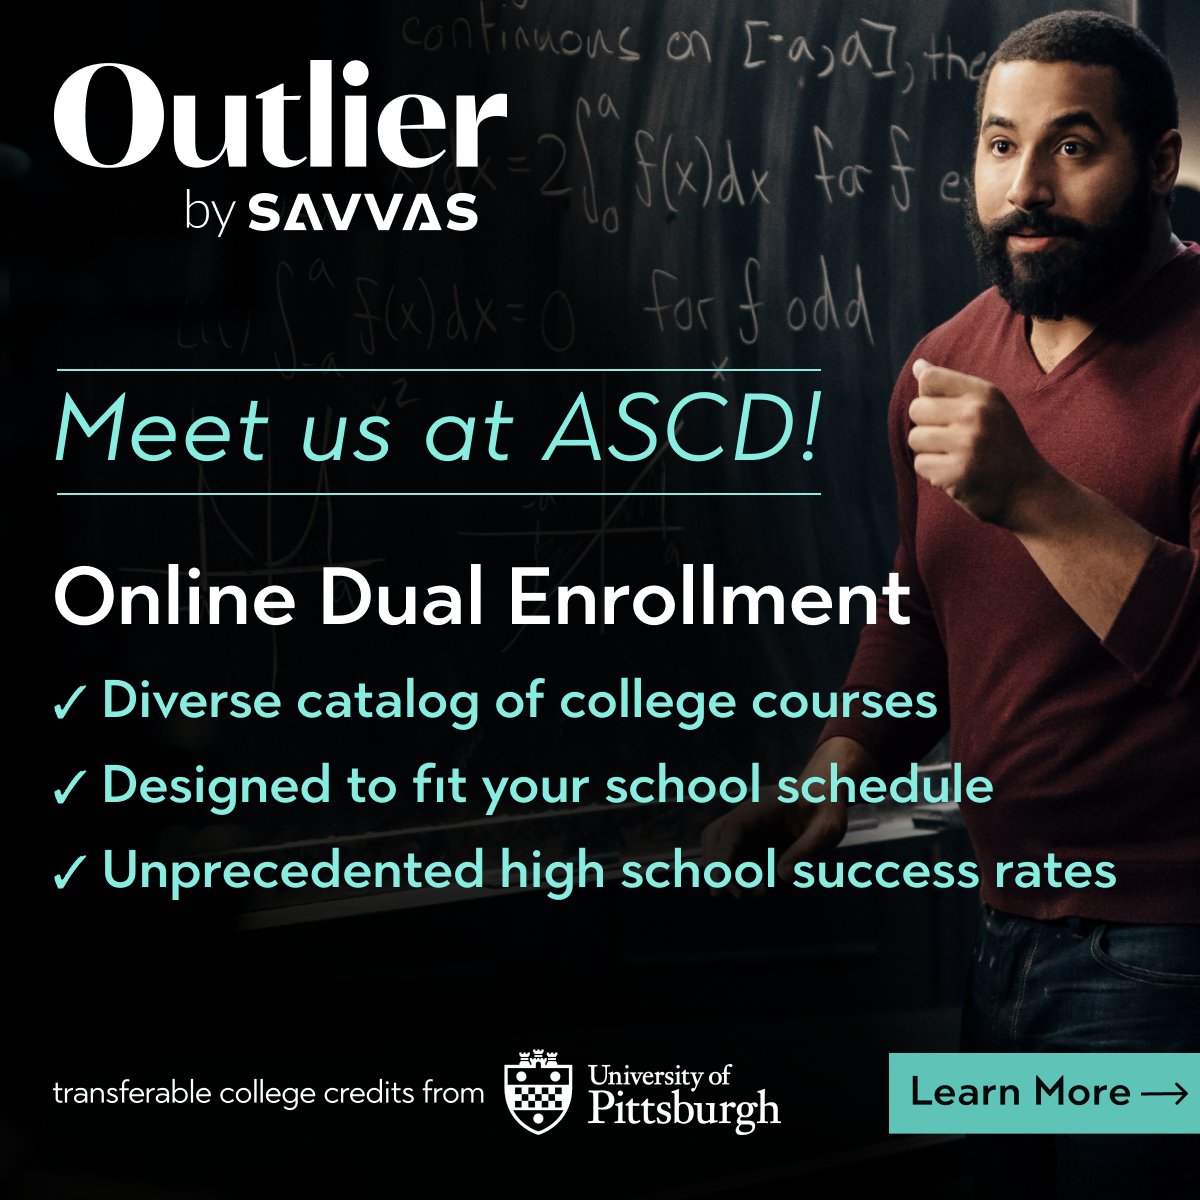 💻 ASCD attendees! Prepare your students for college & career success with a diverse catalog of award-winning courses. Visit the @SavvasLearning booth #1035 to learn more about our new Outlier by Savvas online #DualEnrollment courses: ow.ly/Ni1Y50R02P0 @ASCD #ASCD24 #K12